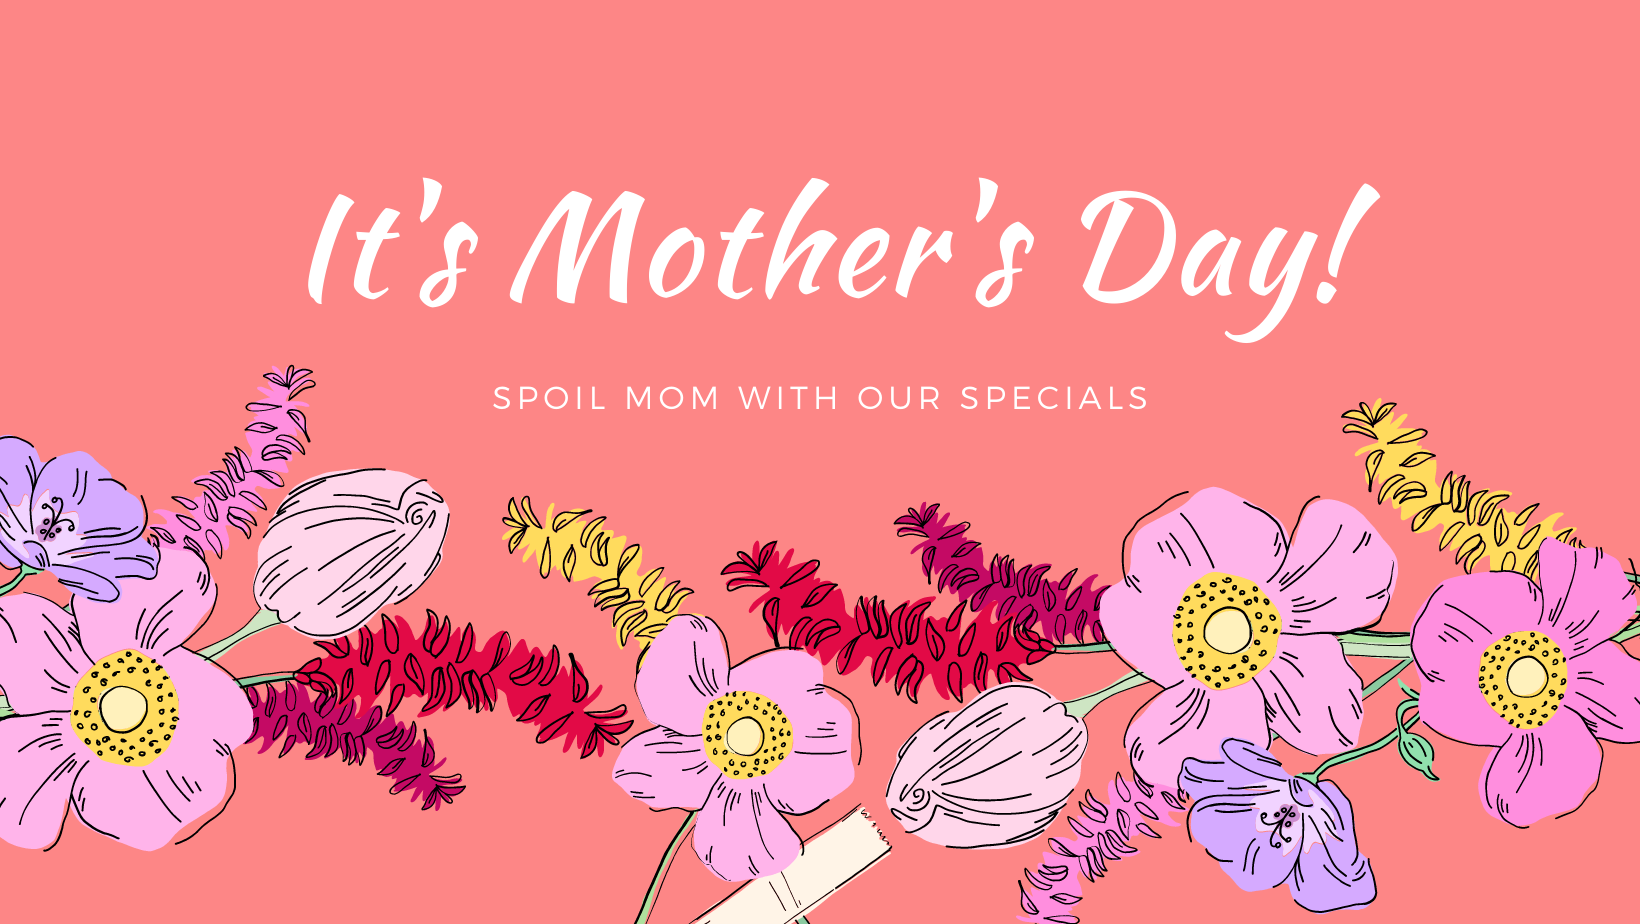 A Banner For Our Mother's Day Special